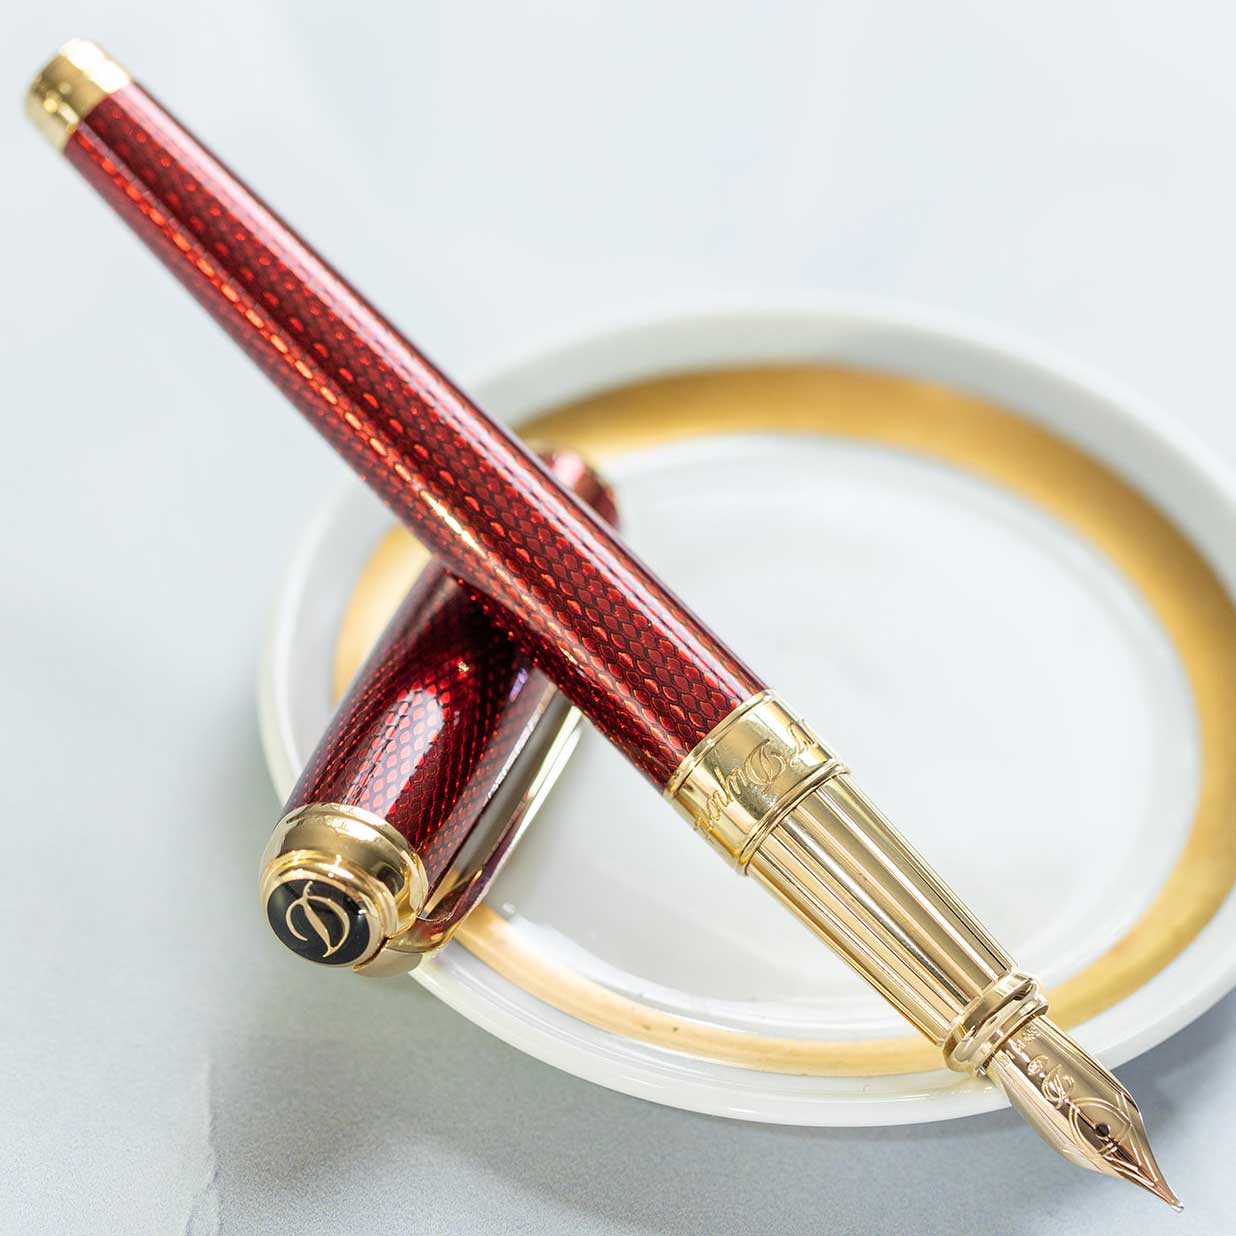 Attent Artistiek buitenste S.T. Dupont Line D Diamond Guilloche Large Fountain Pen – Ruby, Gold Trim –  US Exclusive – The Nibsmith